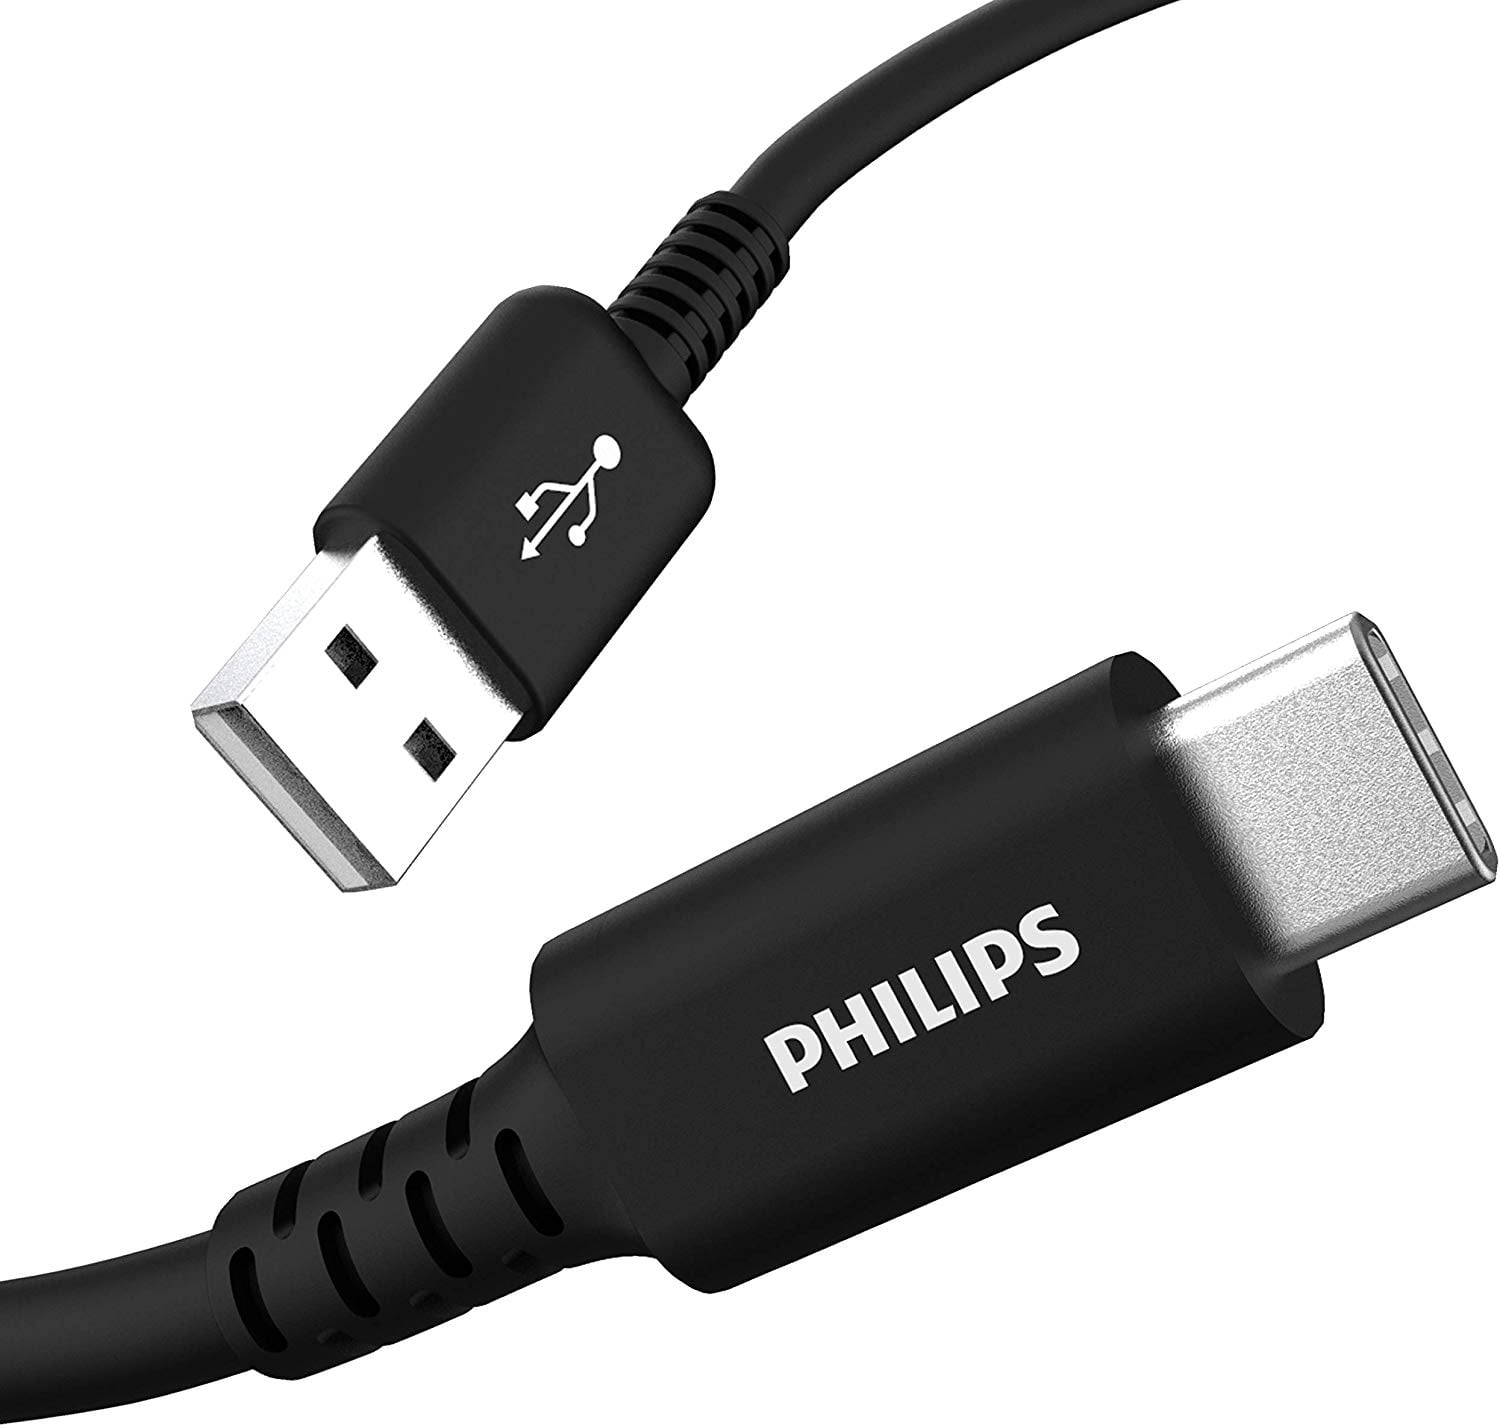 Philips USB-C to USB-A 6ft., Cellphones and Tablets, Charging Cable